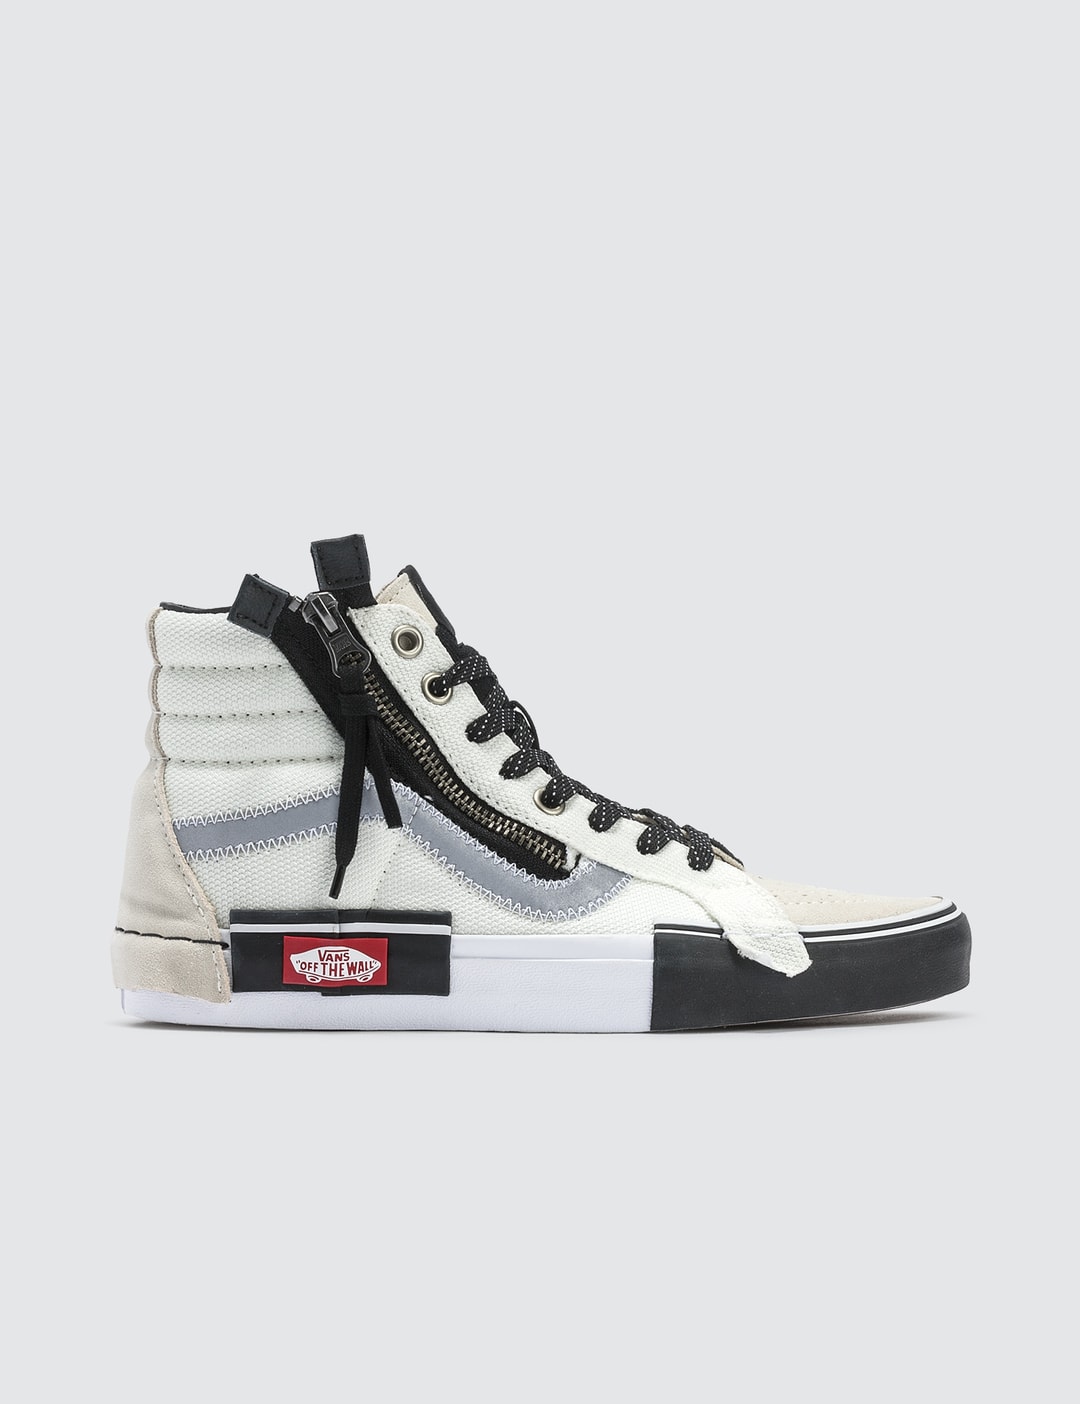 Pinchazo administración inundar Vans - Sk8-Hi Reissue Cap | HBX - Globally Curated Fashion and Lifestyle by  Hypebeast